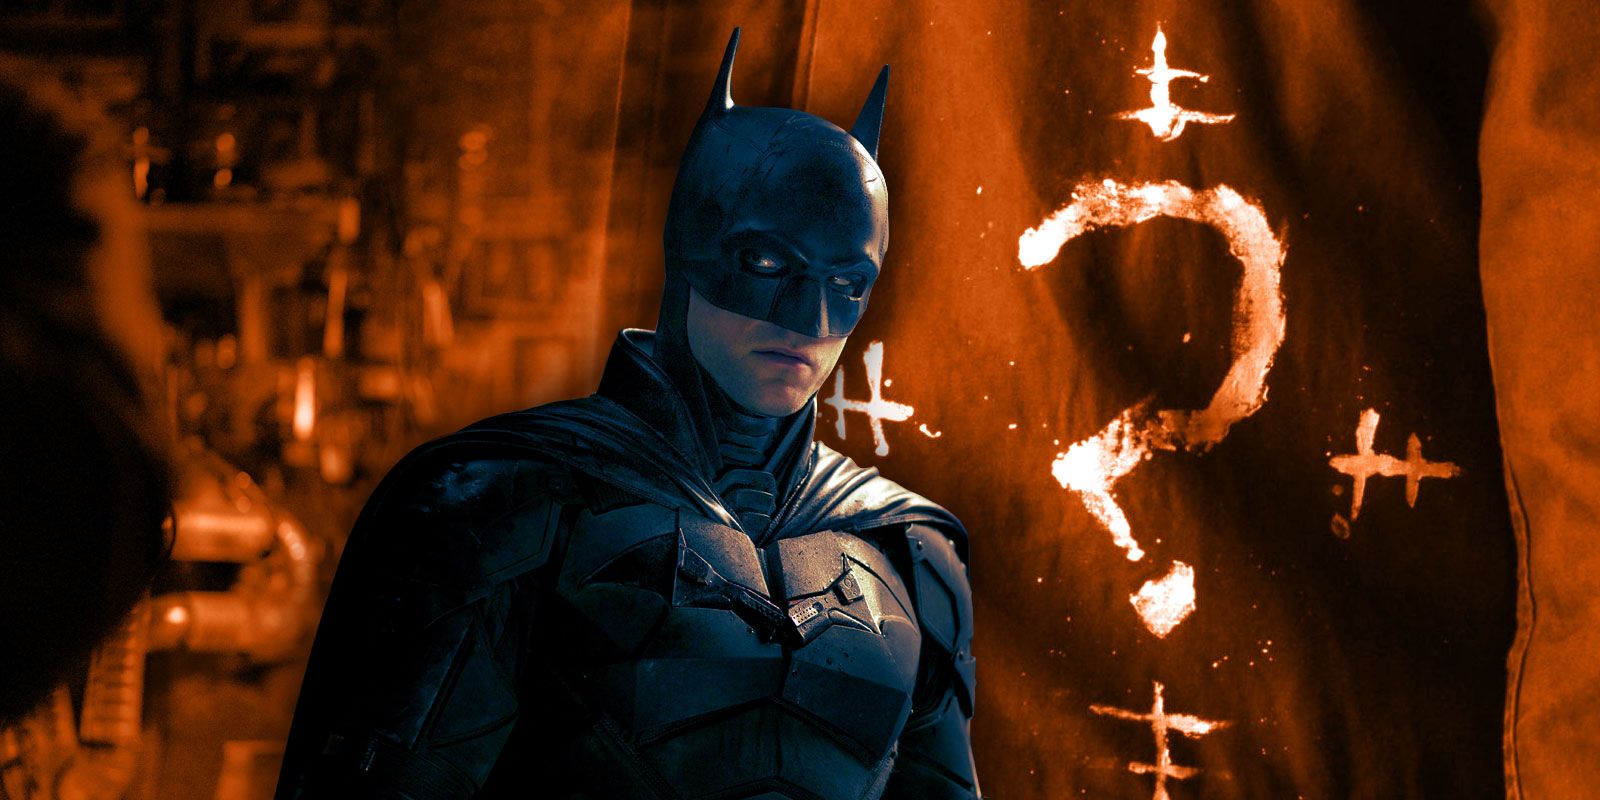 Pattinson's Batman with one of Riddler's hand drawn question marks.